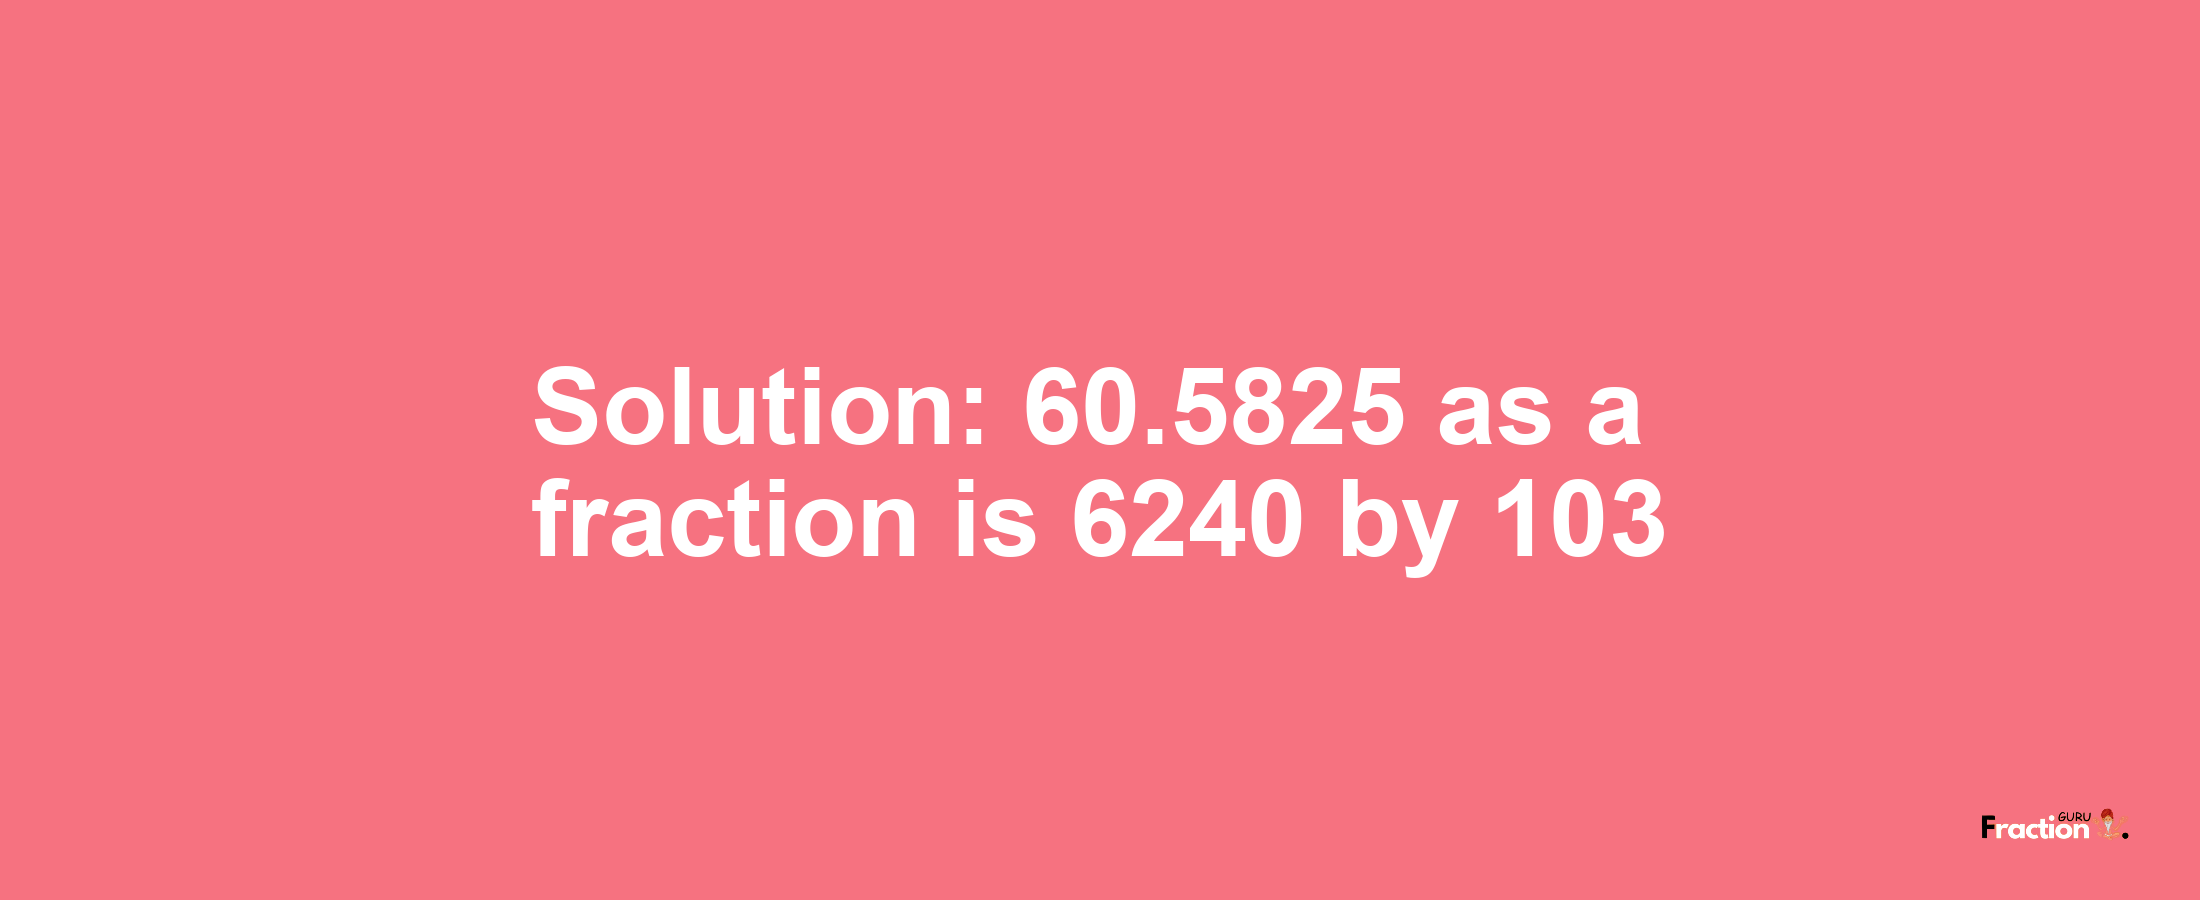 Solution:60.5825 as a fraction is 6240/103